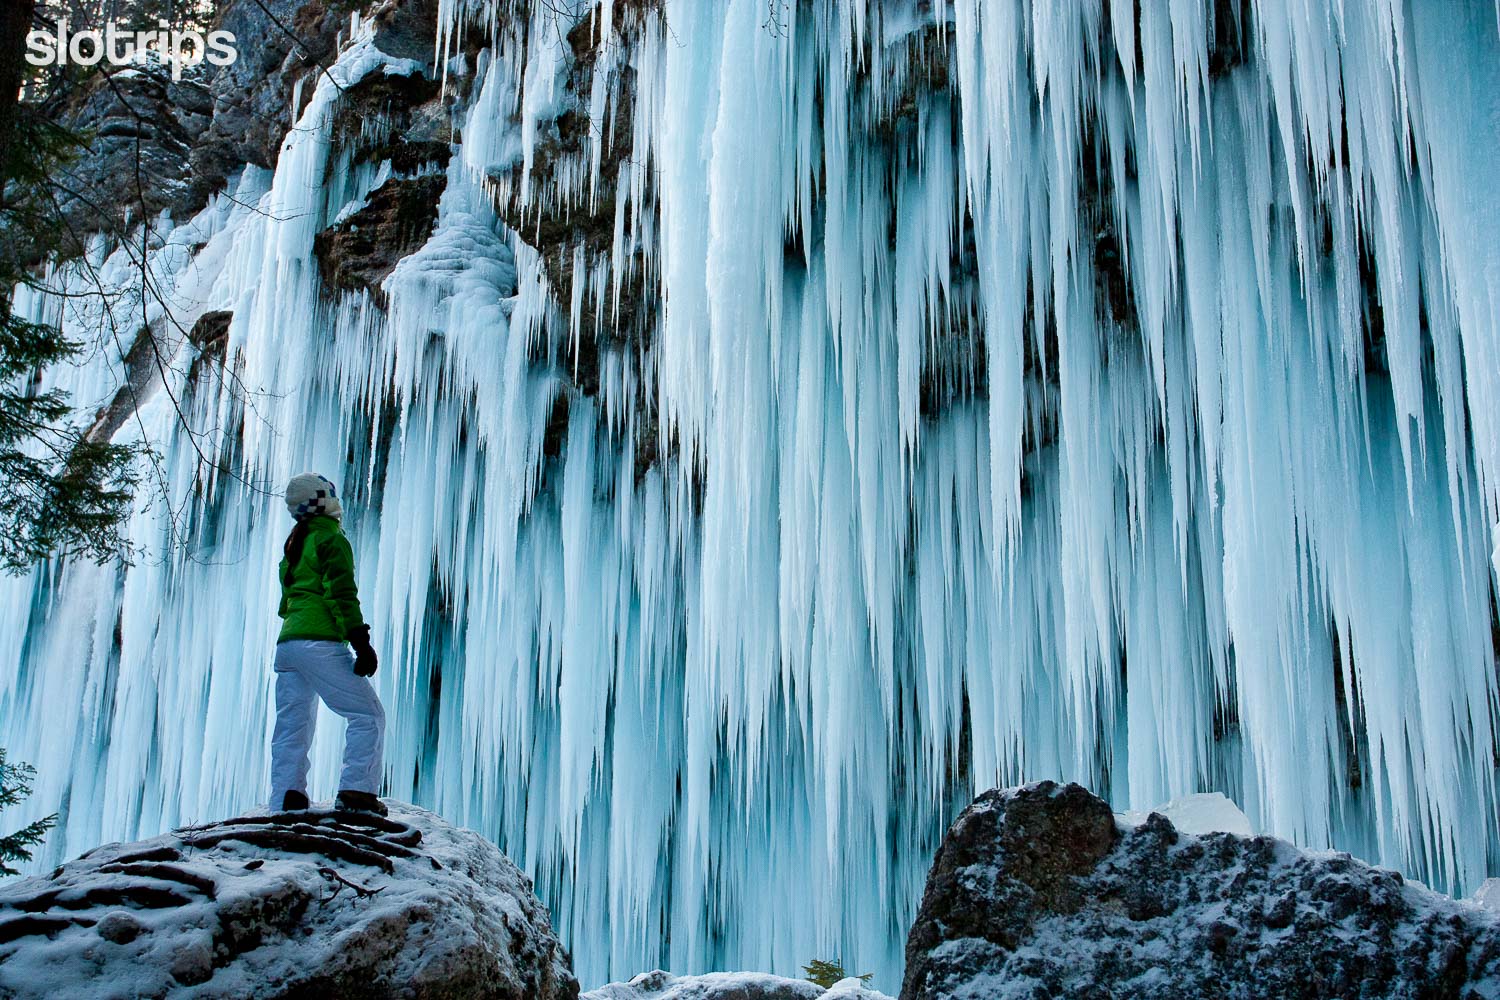 A hiker in front of an ice wall of icicles formed from the Pericnik Waterfall in the Vrata Valley in Triglav National Park, Slovenia